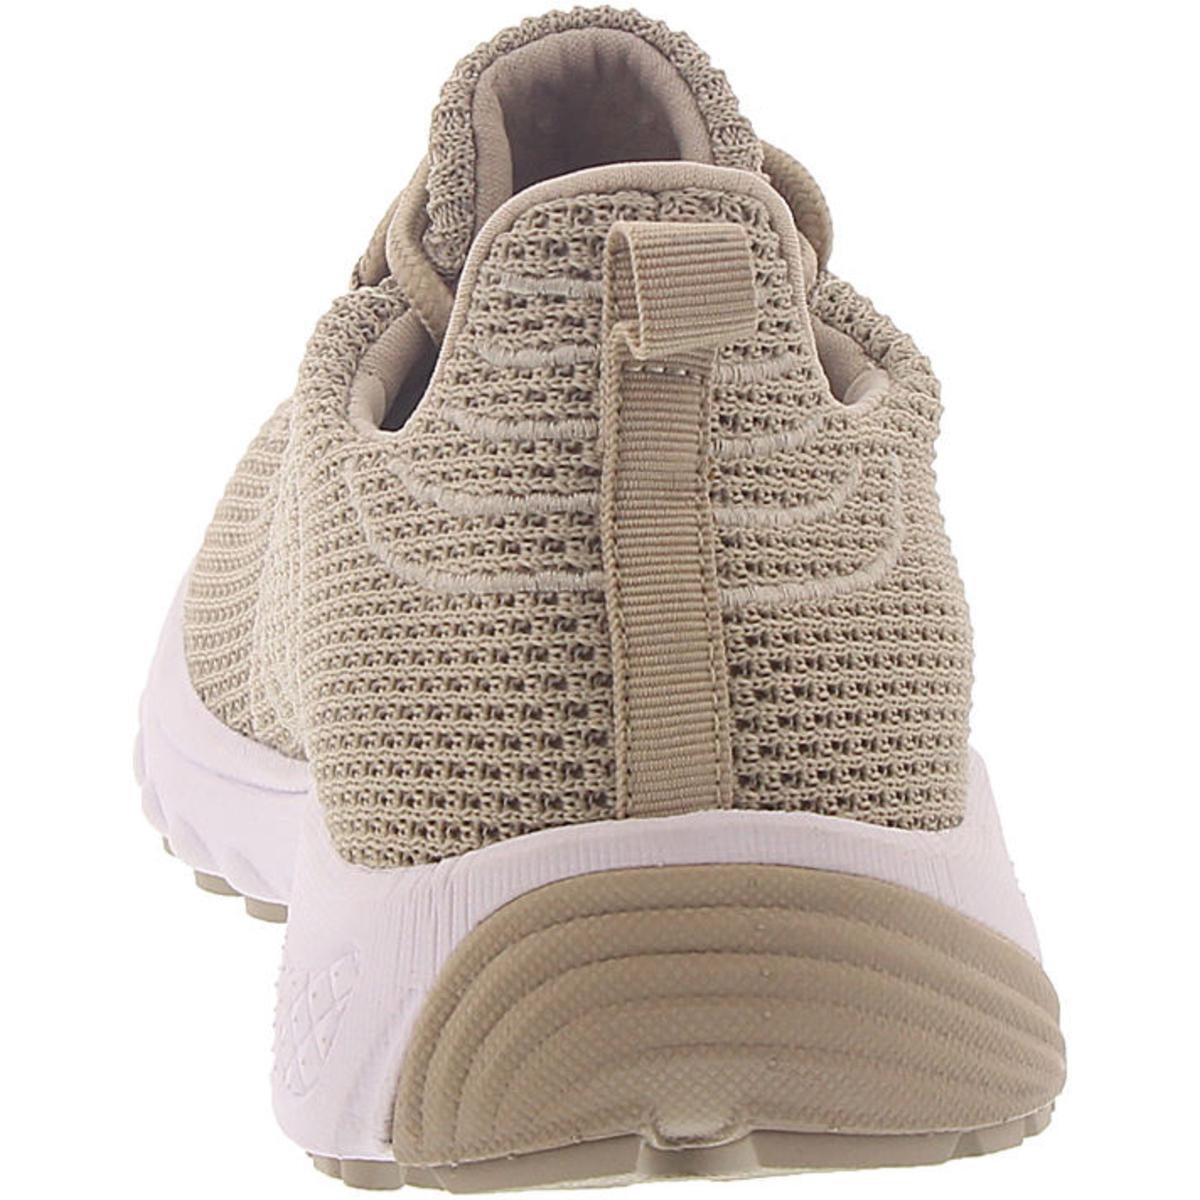 Propet Womens Tour Knit Beige Athletic Shoes Sneakers 8